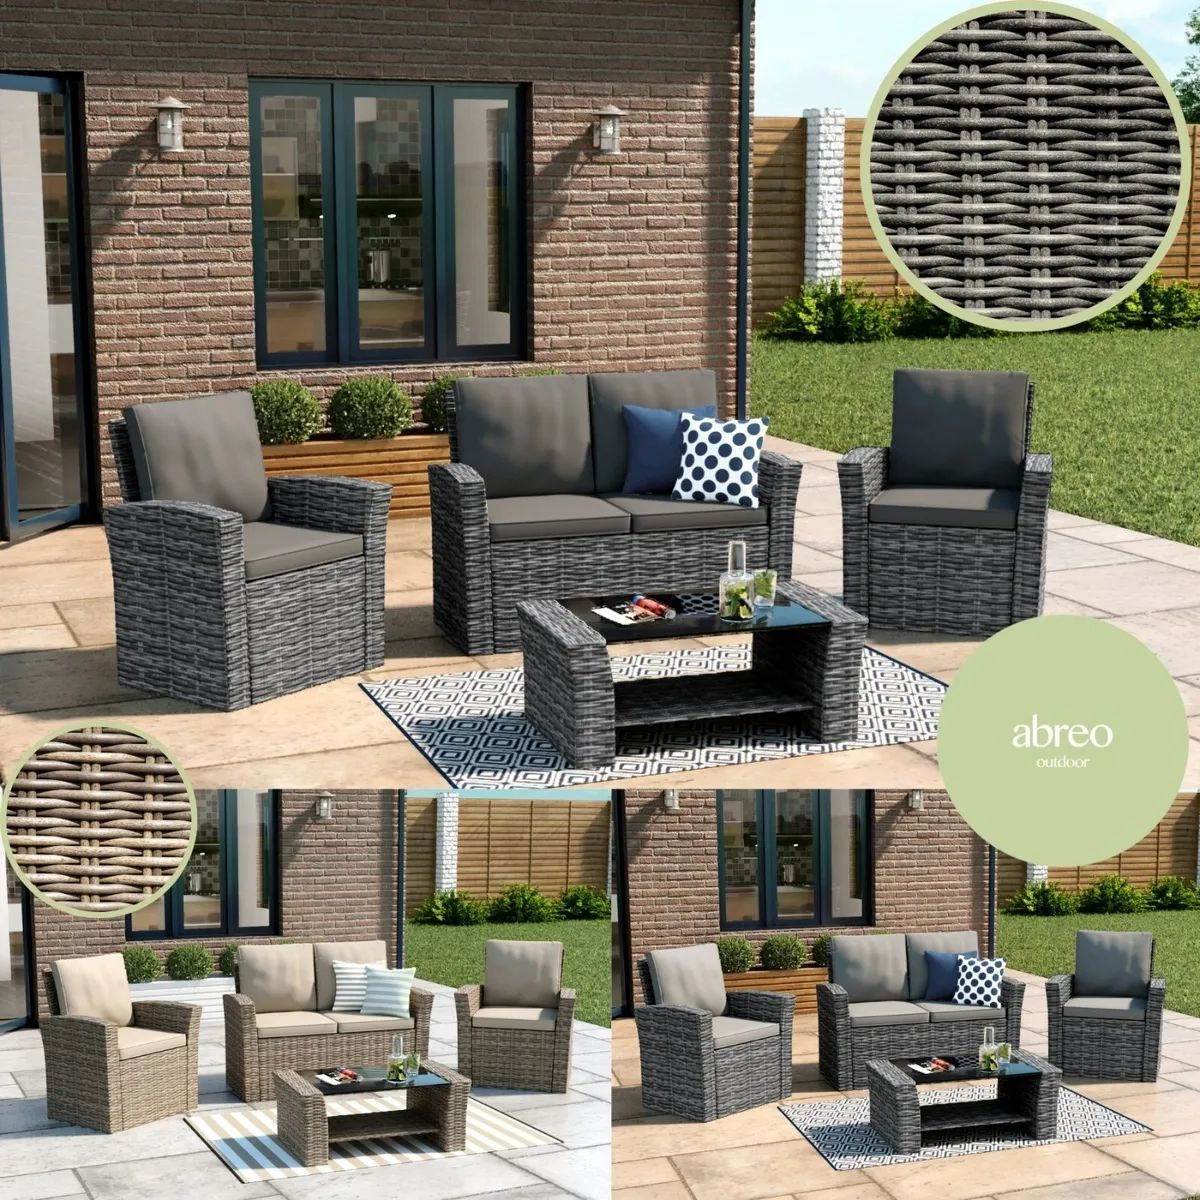 Half Round Rattan Garden Furniture 4 Seater Coffee Table Sofa Chairs Set  Outdoor | Ebay Intended For Outdoor Half Round Coffee Tables (View 8 of 15)